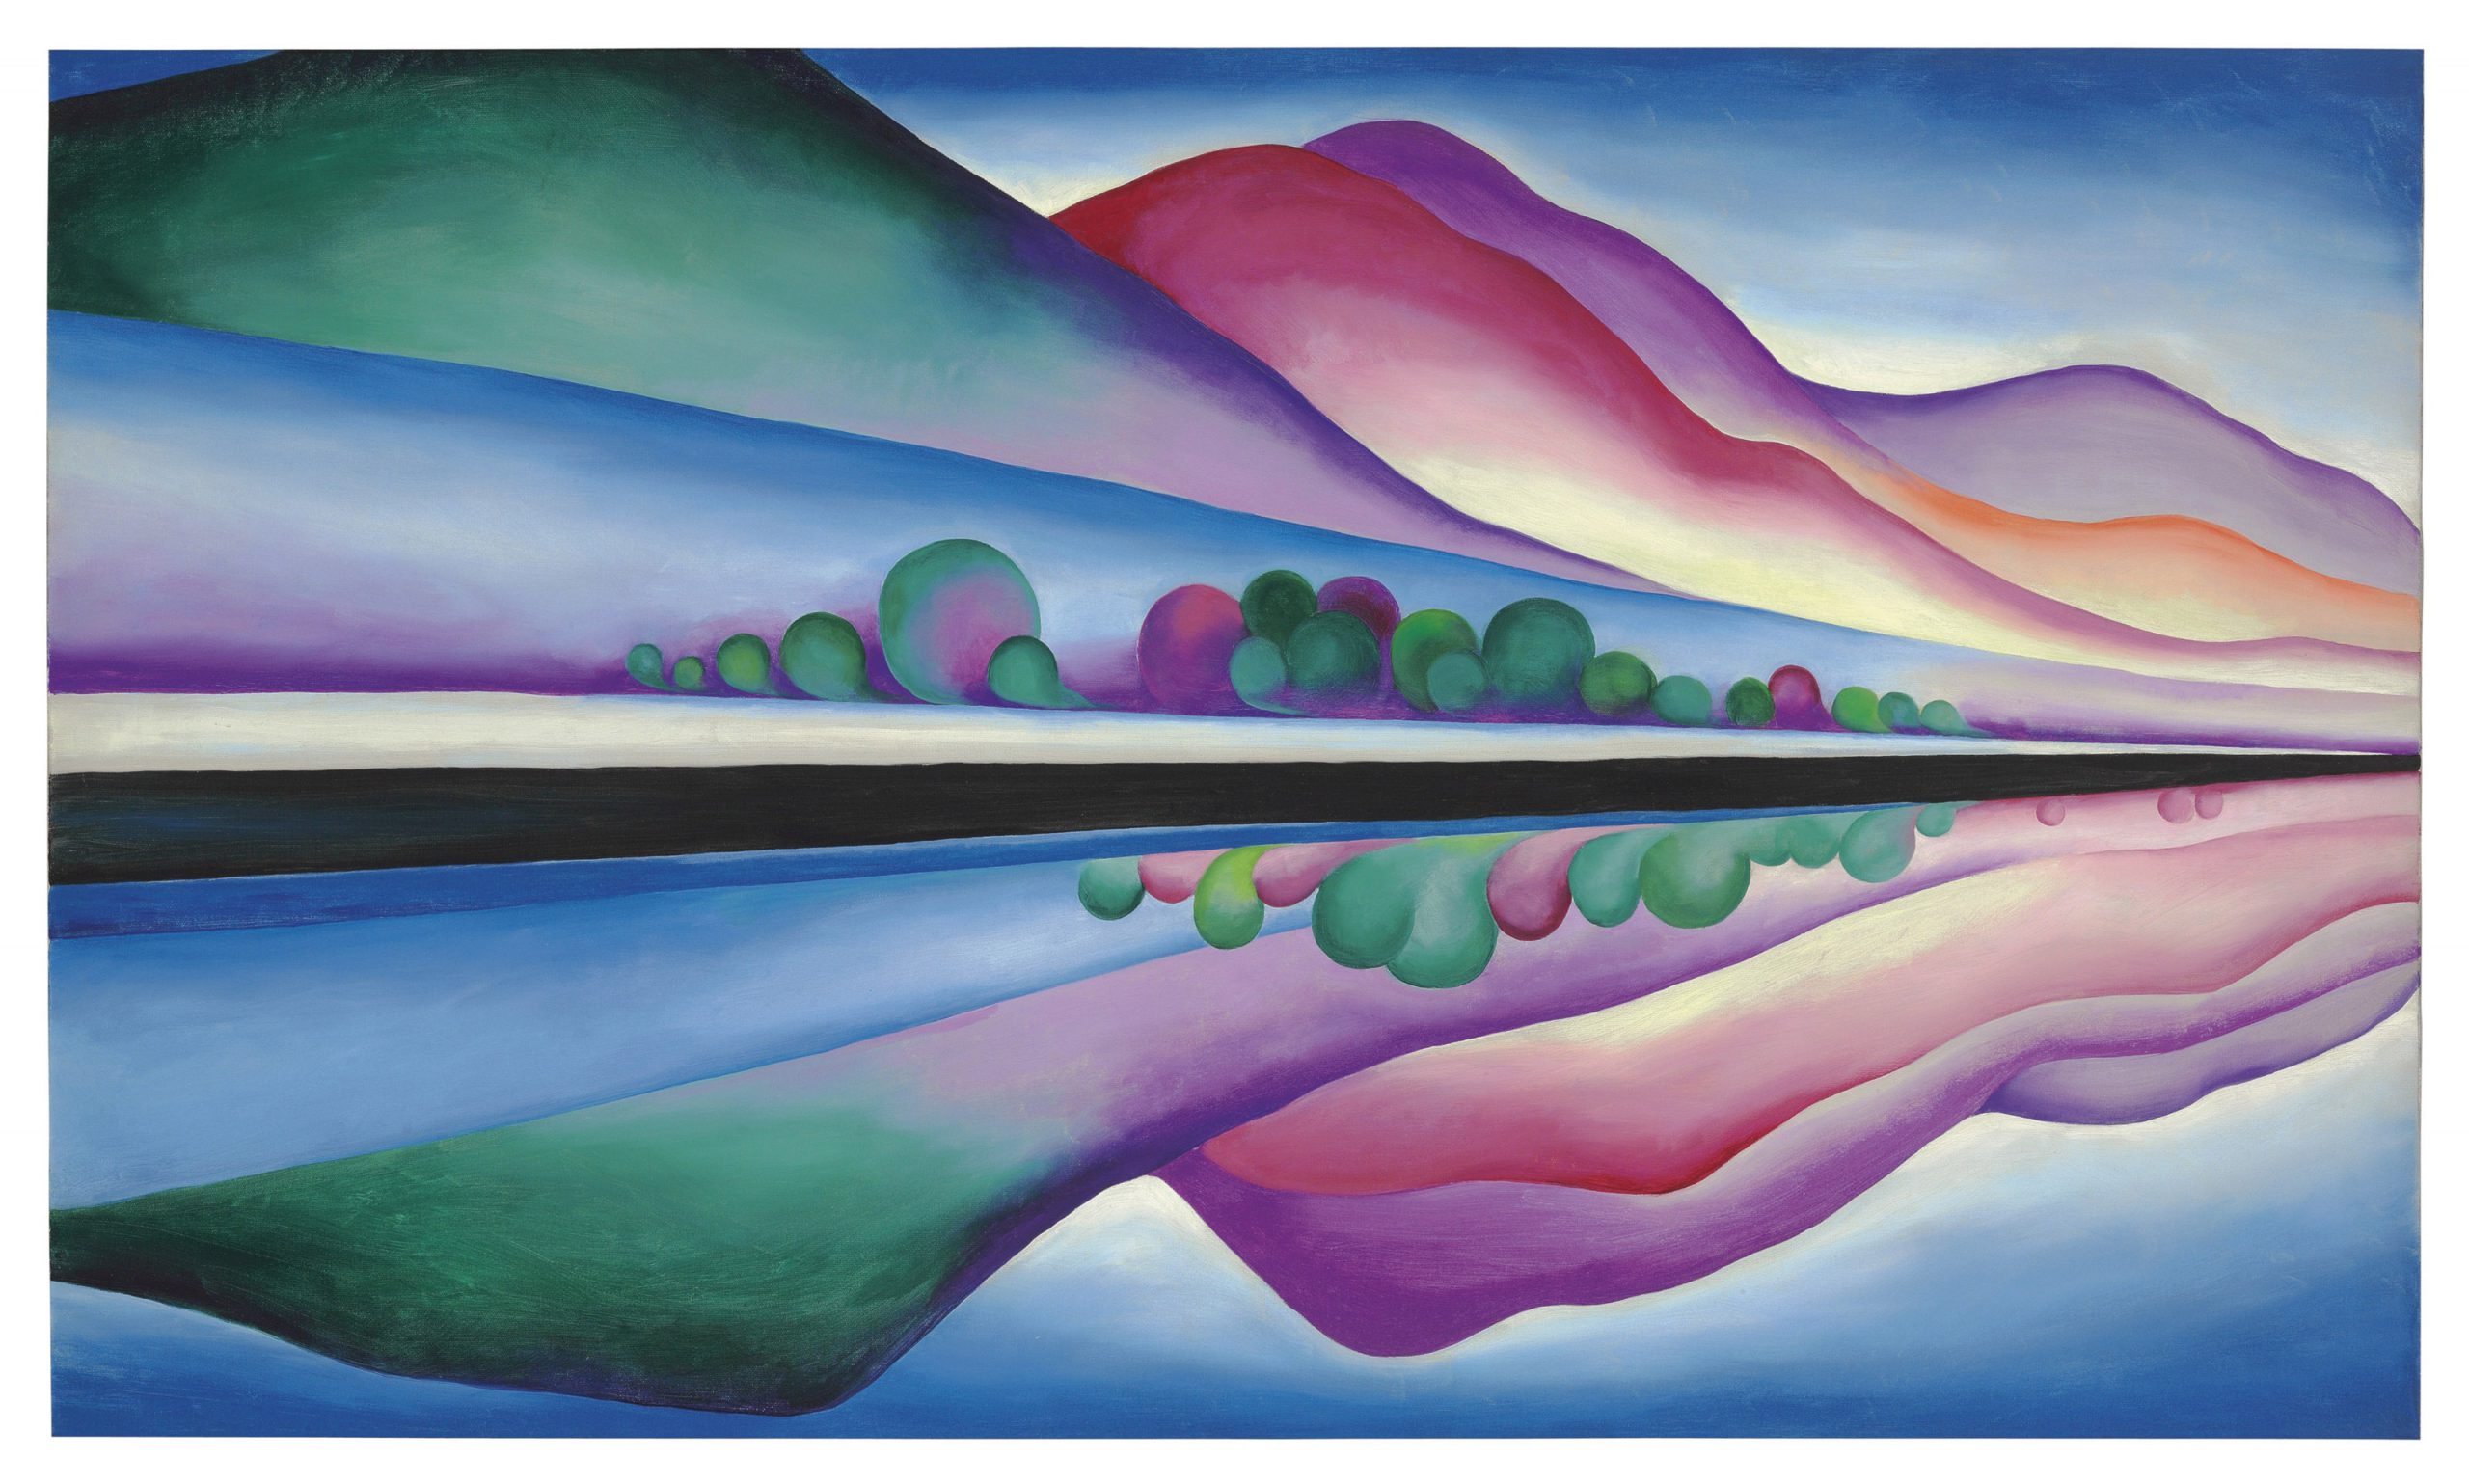 Artwork pictured by Georgia O’Keeffe, Lake George Reflection, 1921